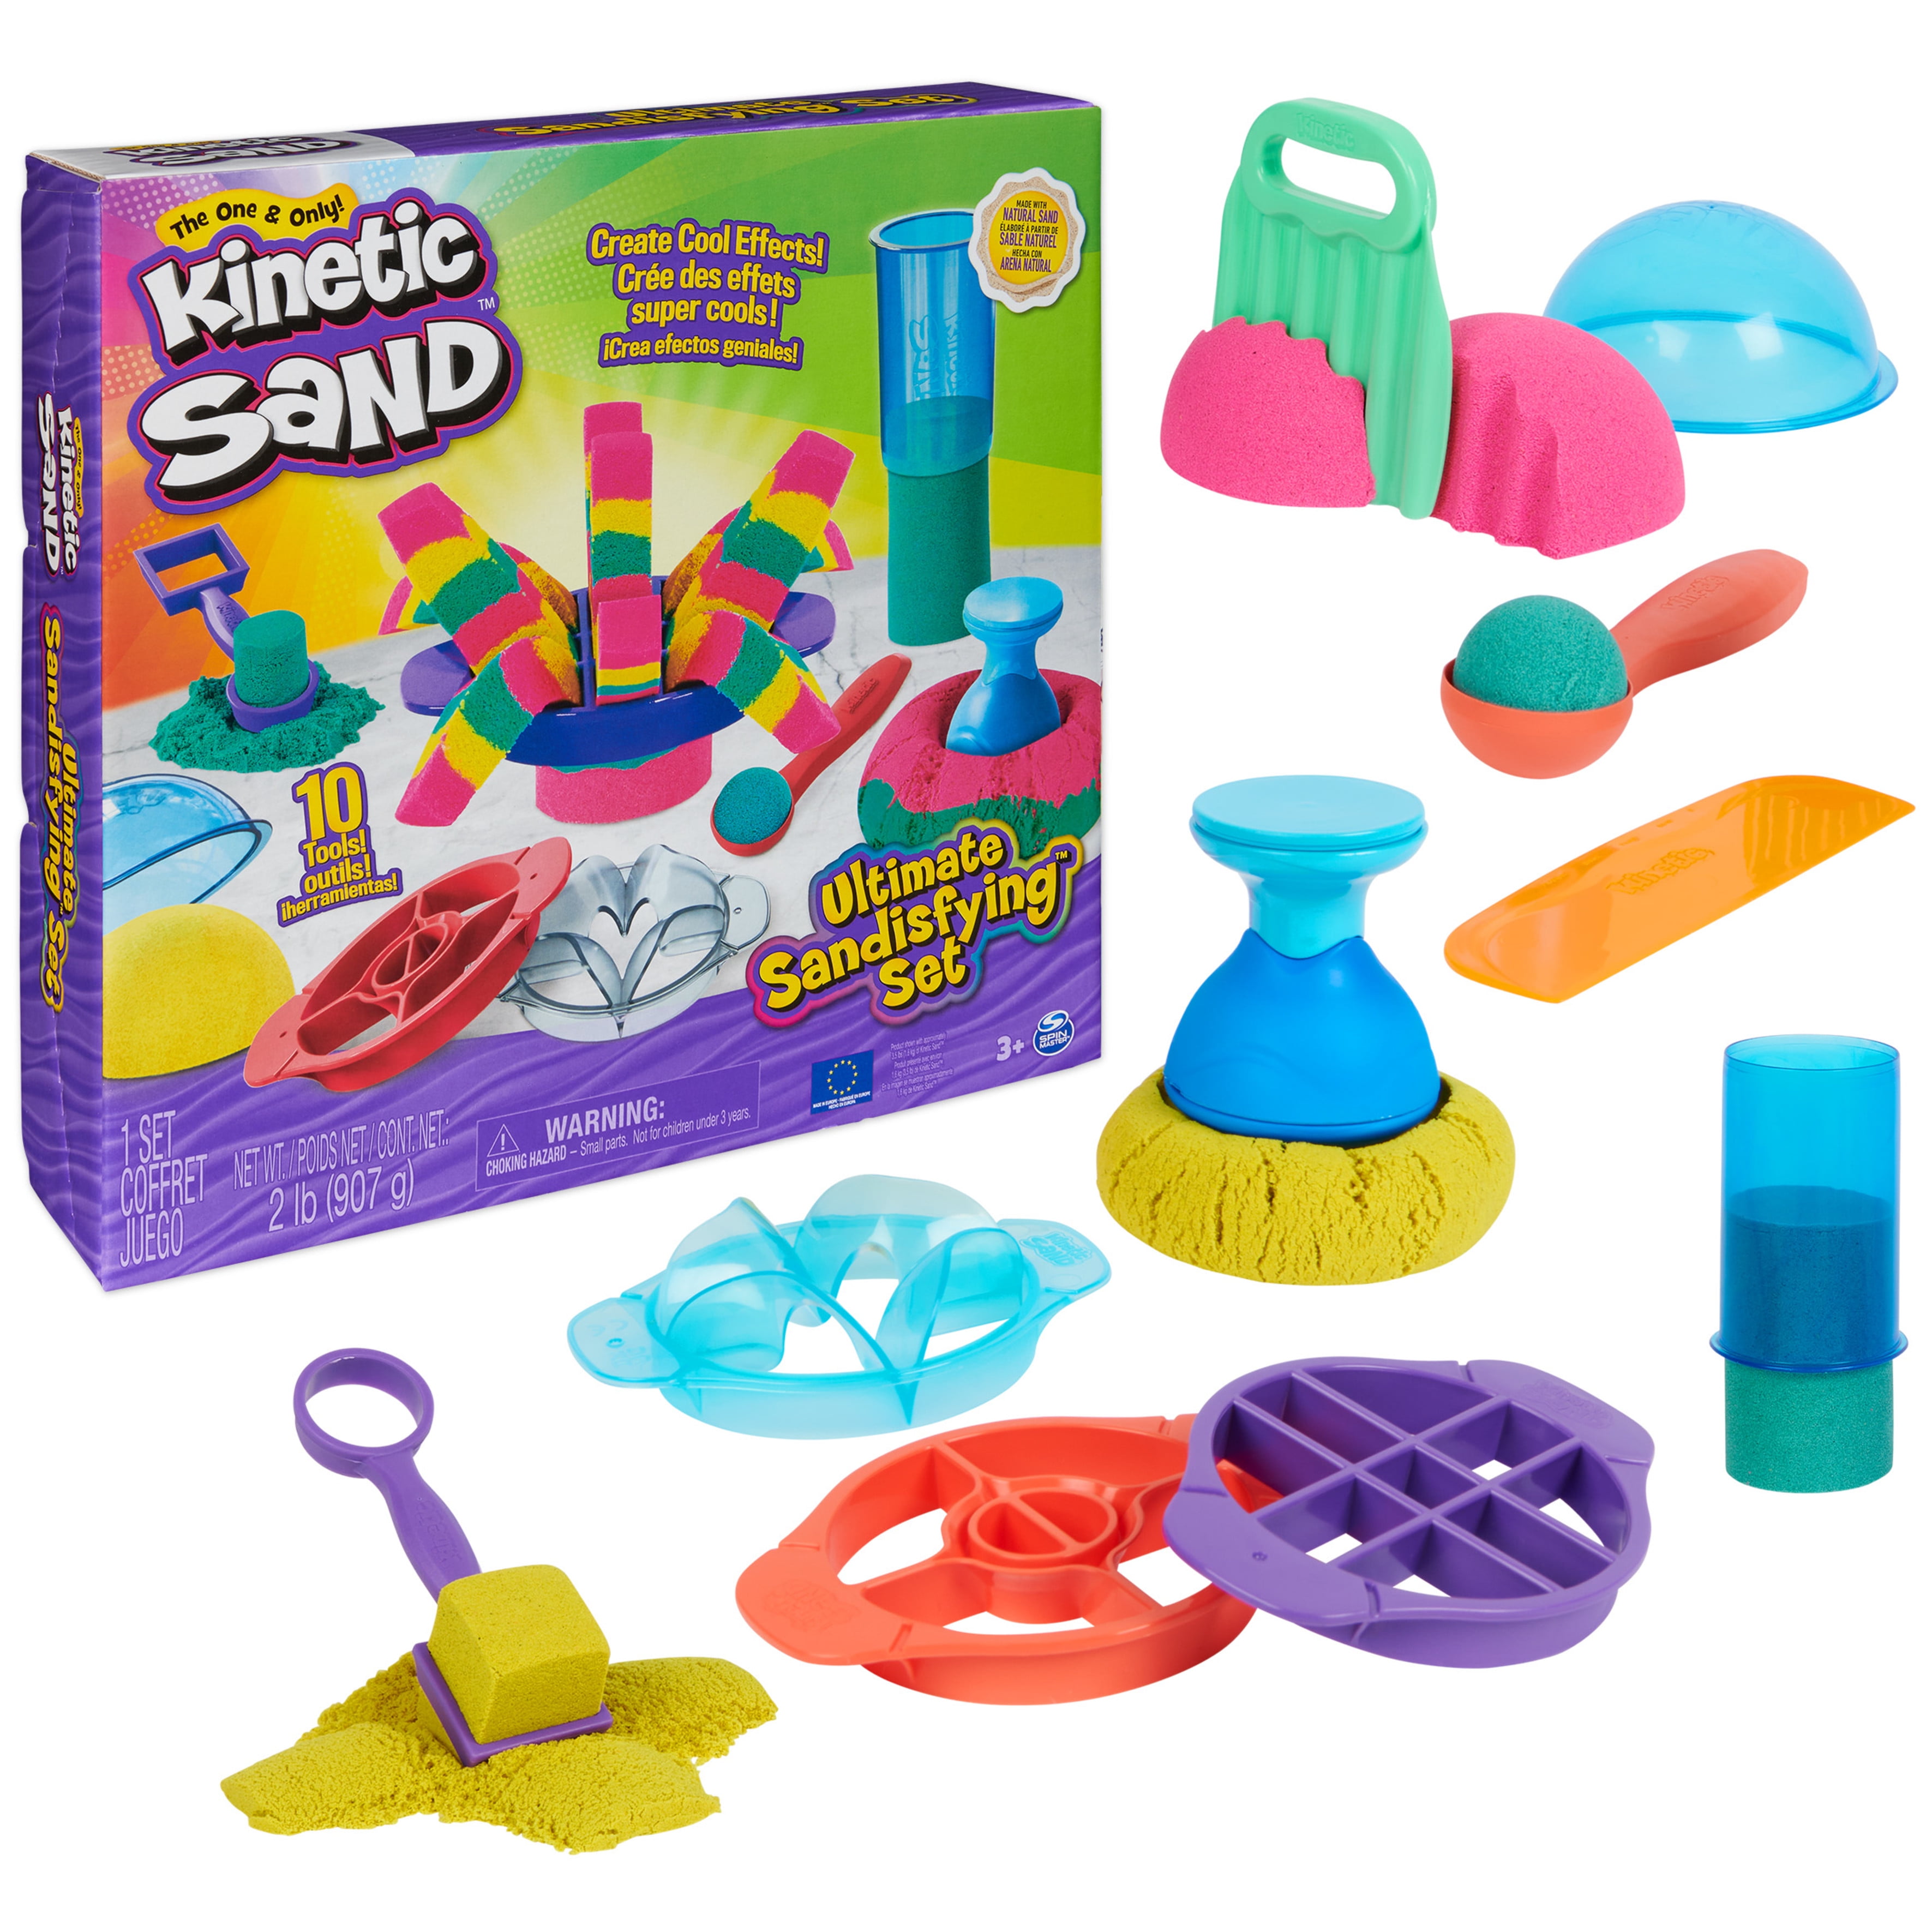 10 Ways to Play with Kinetic Sand